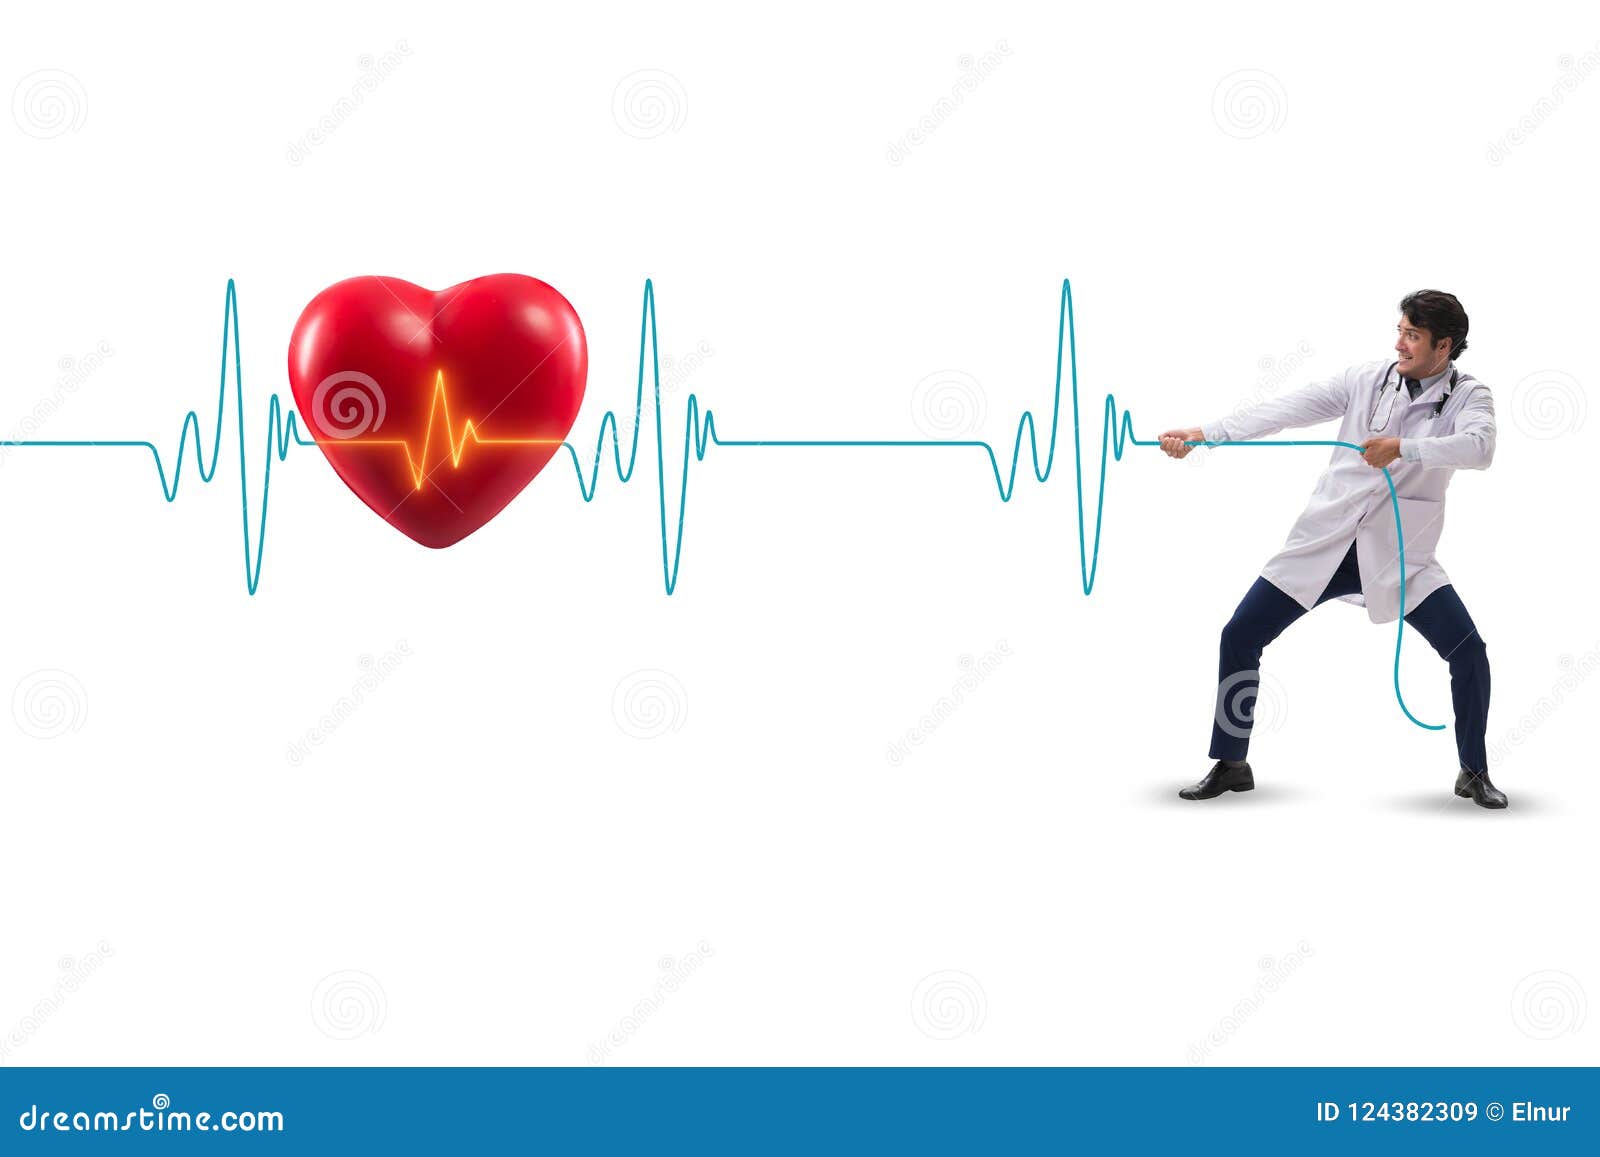 the cardiologist in telemedicine concept with heart beat